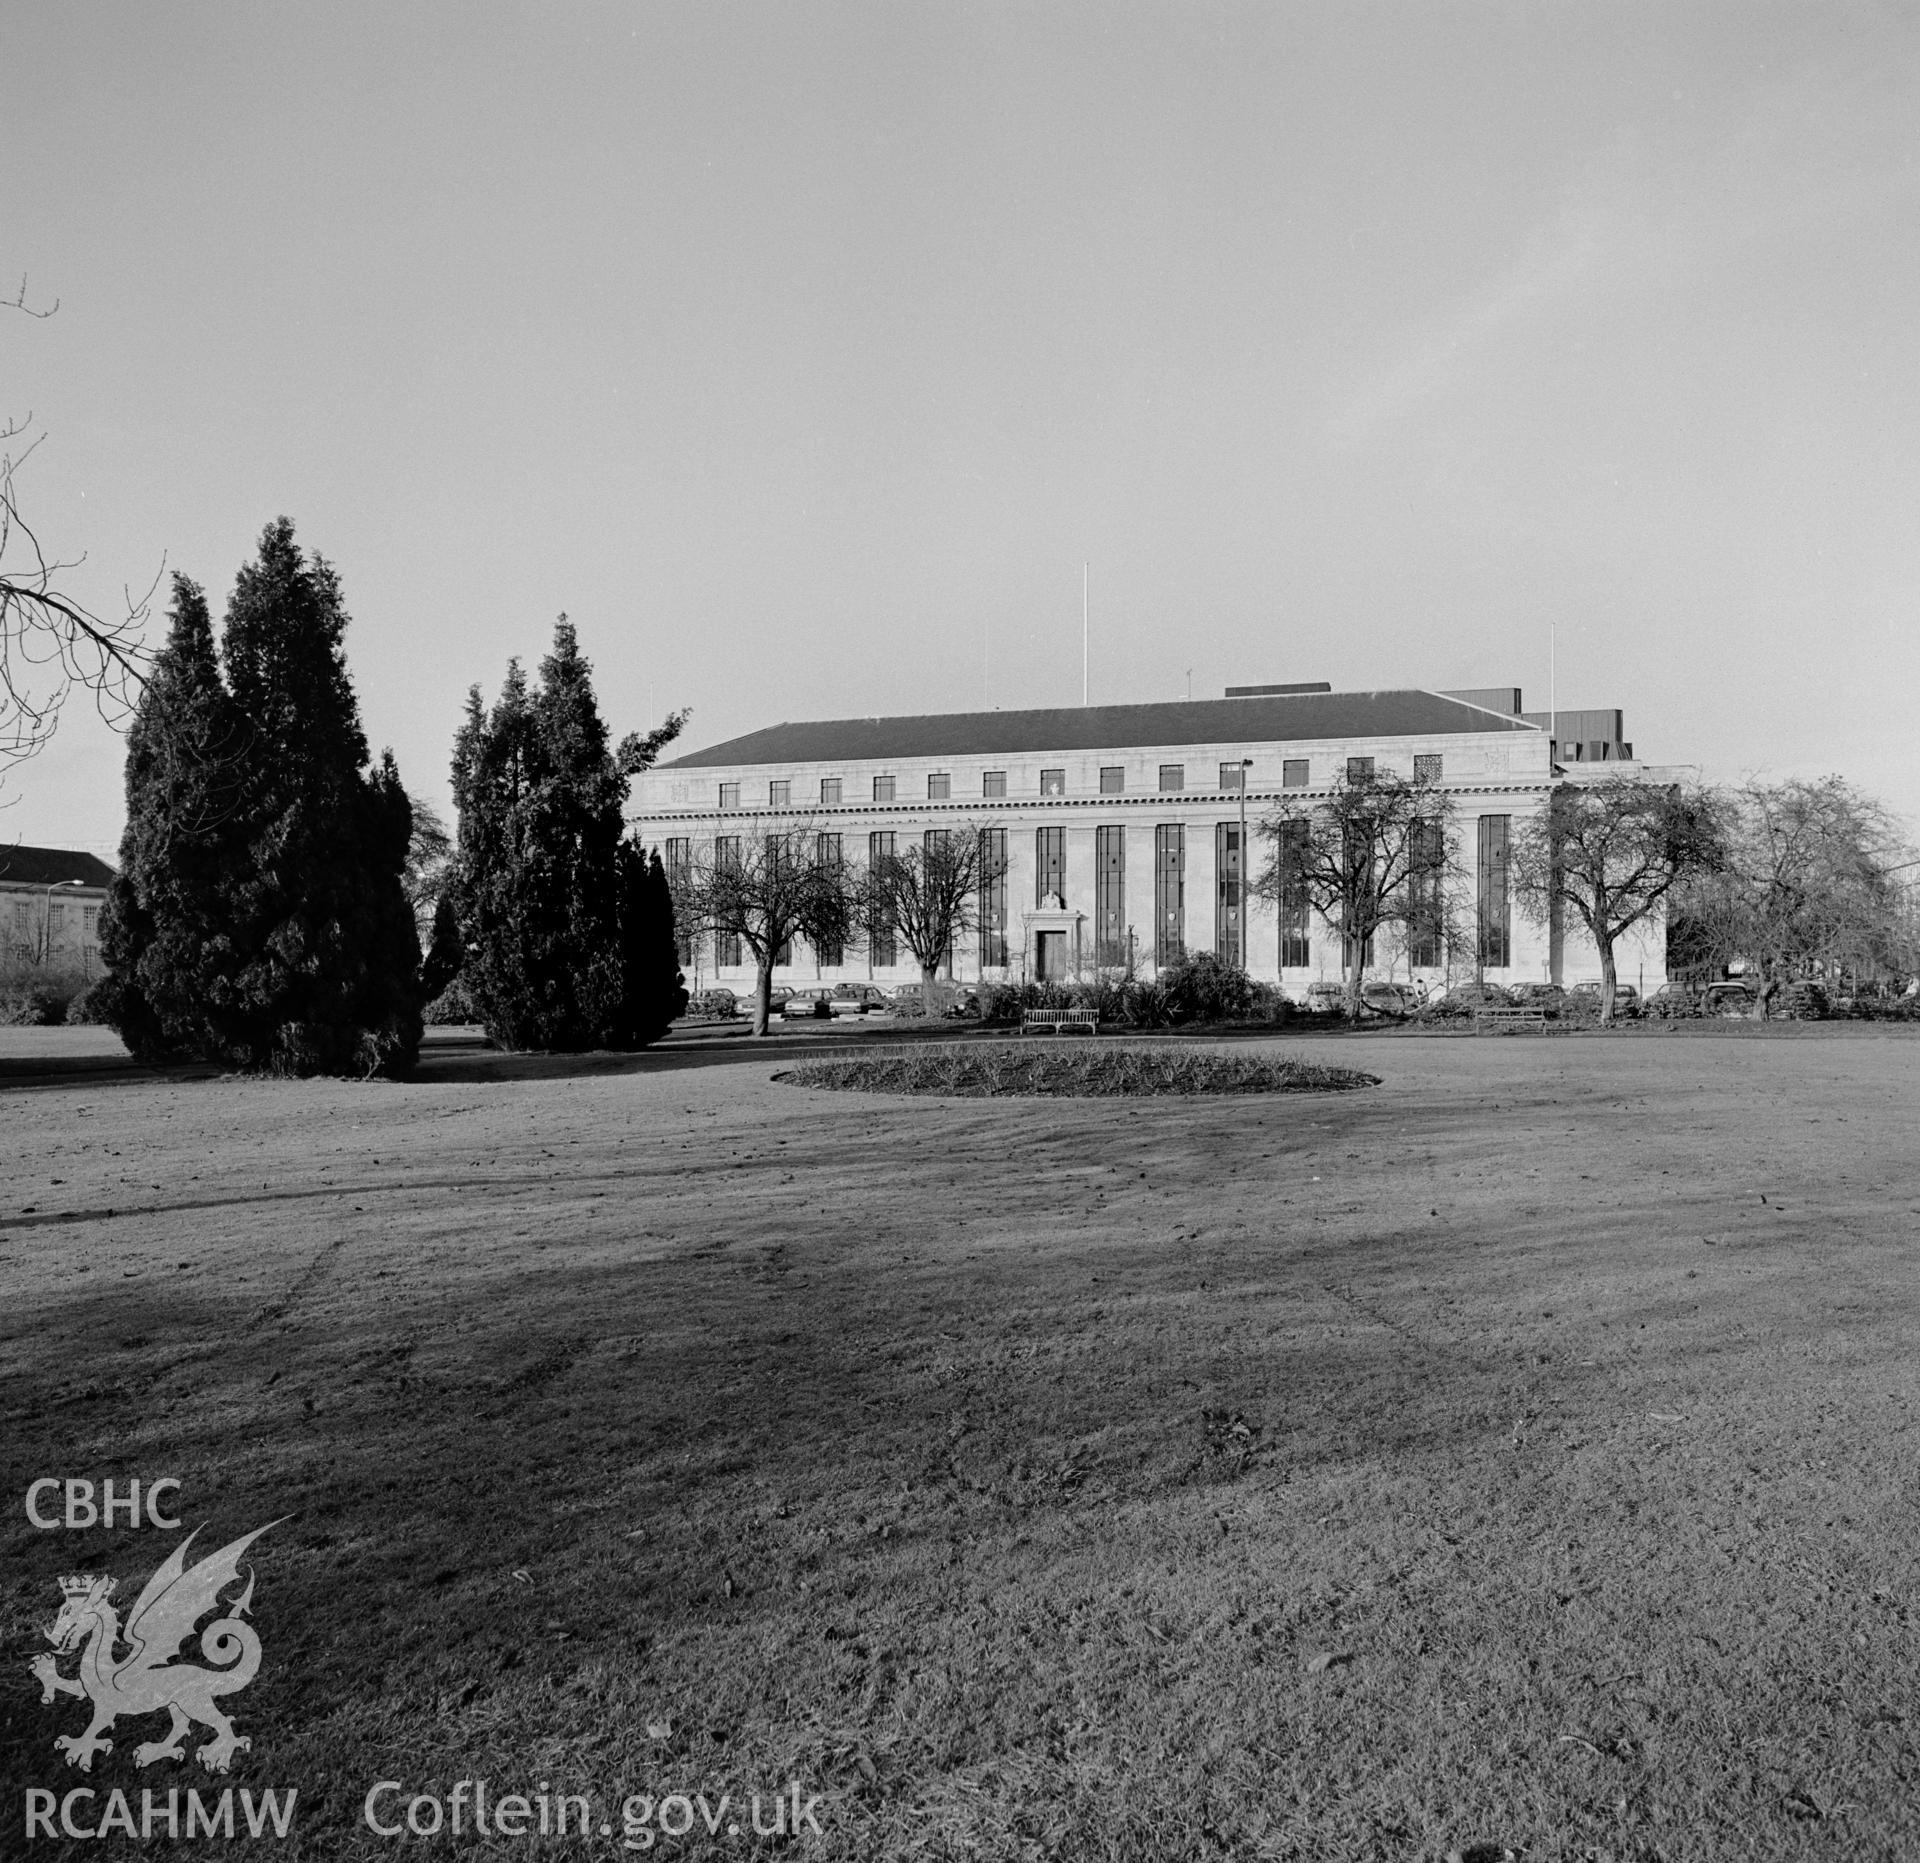 Photographic negative showing view of the Welsh Office building, Cathays Park, Cardiff; collated by the former Central Office of Information.